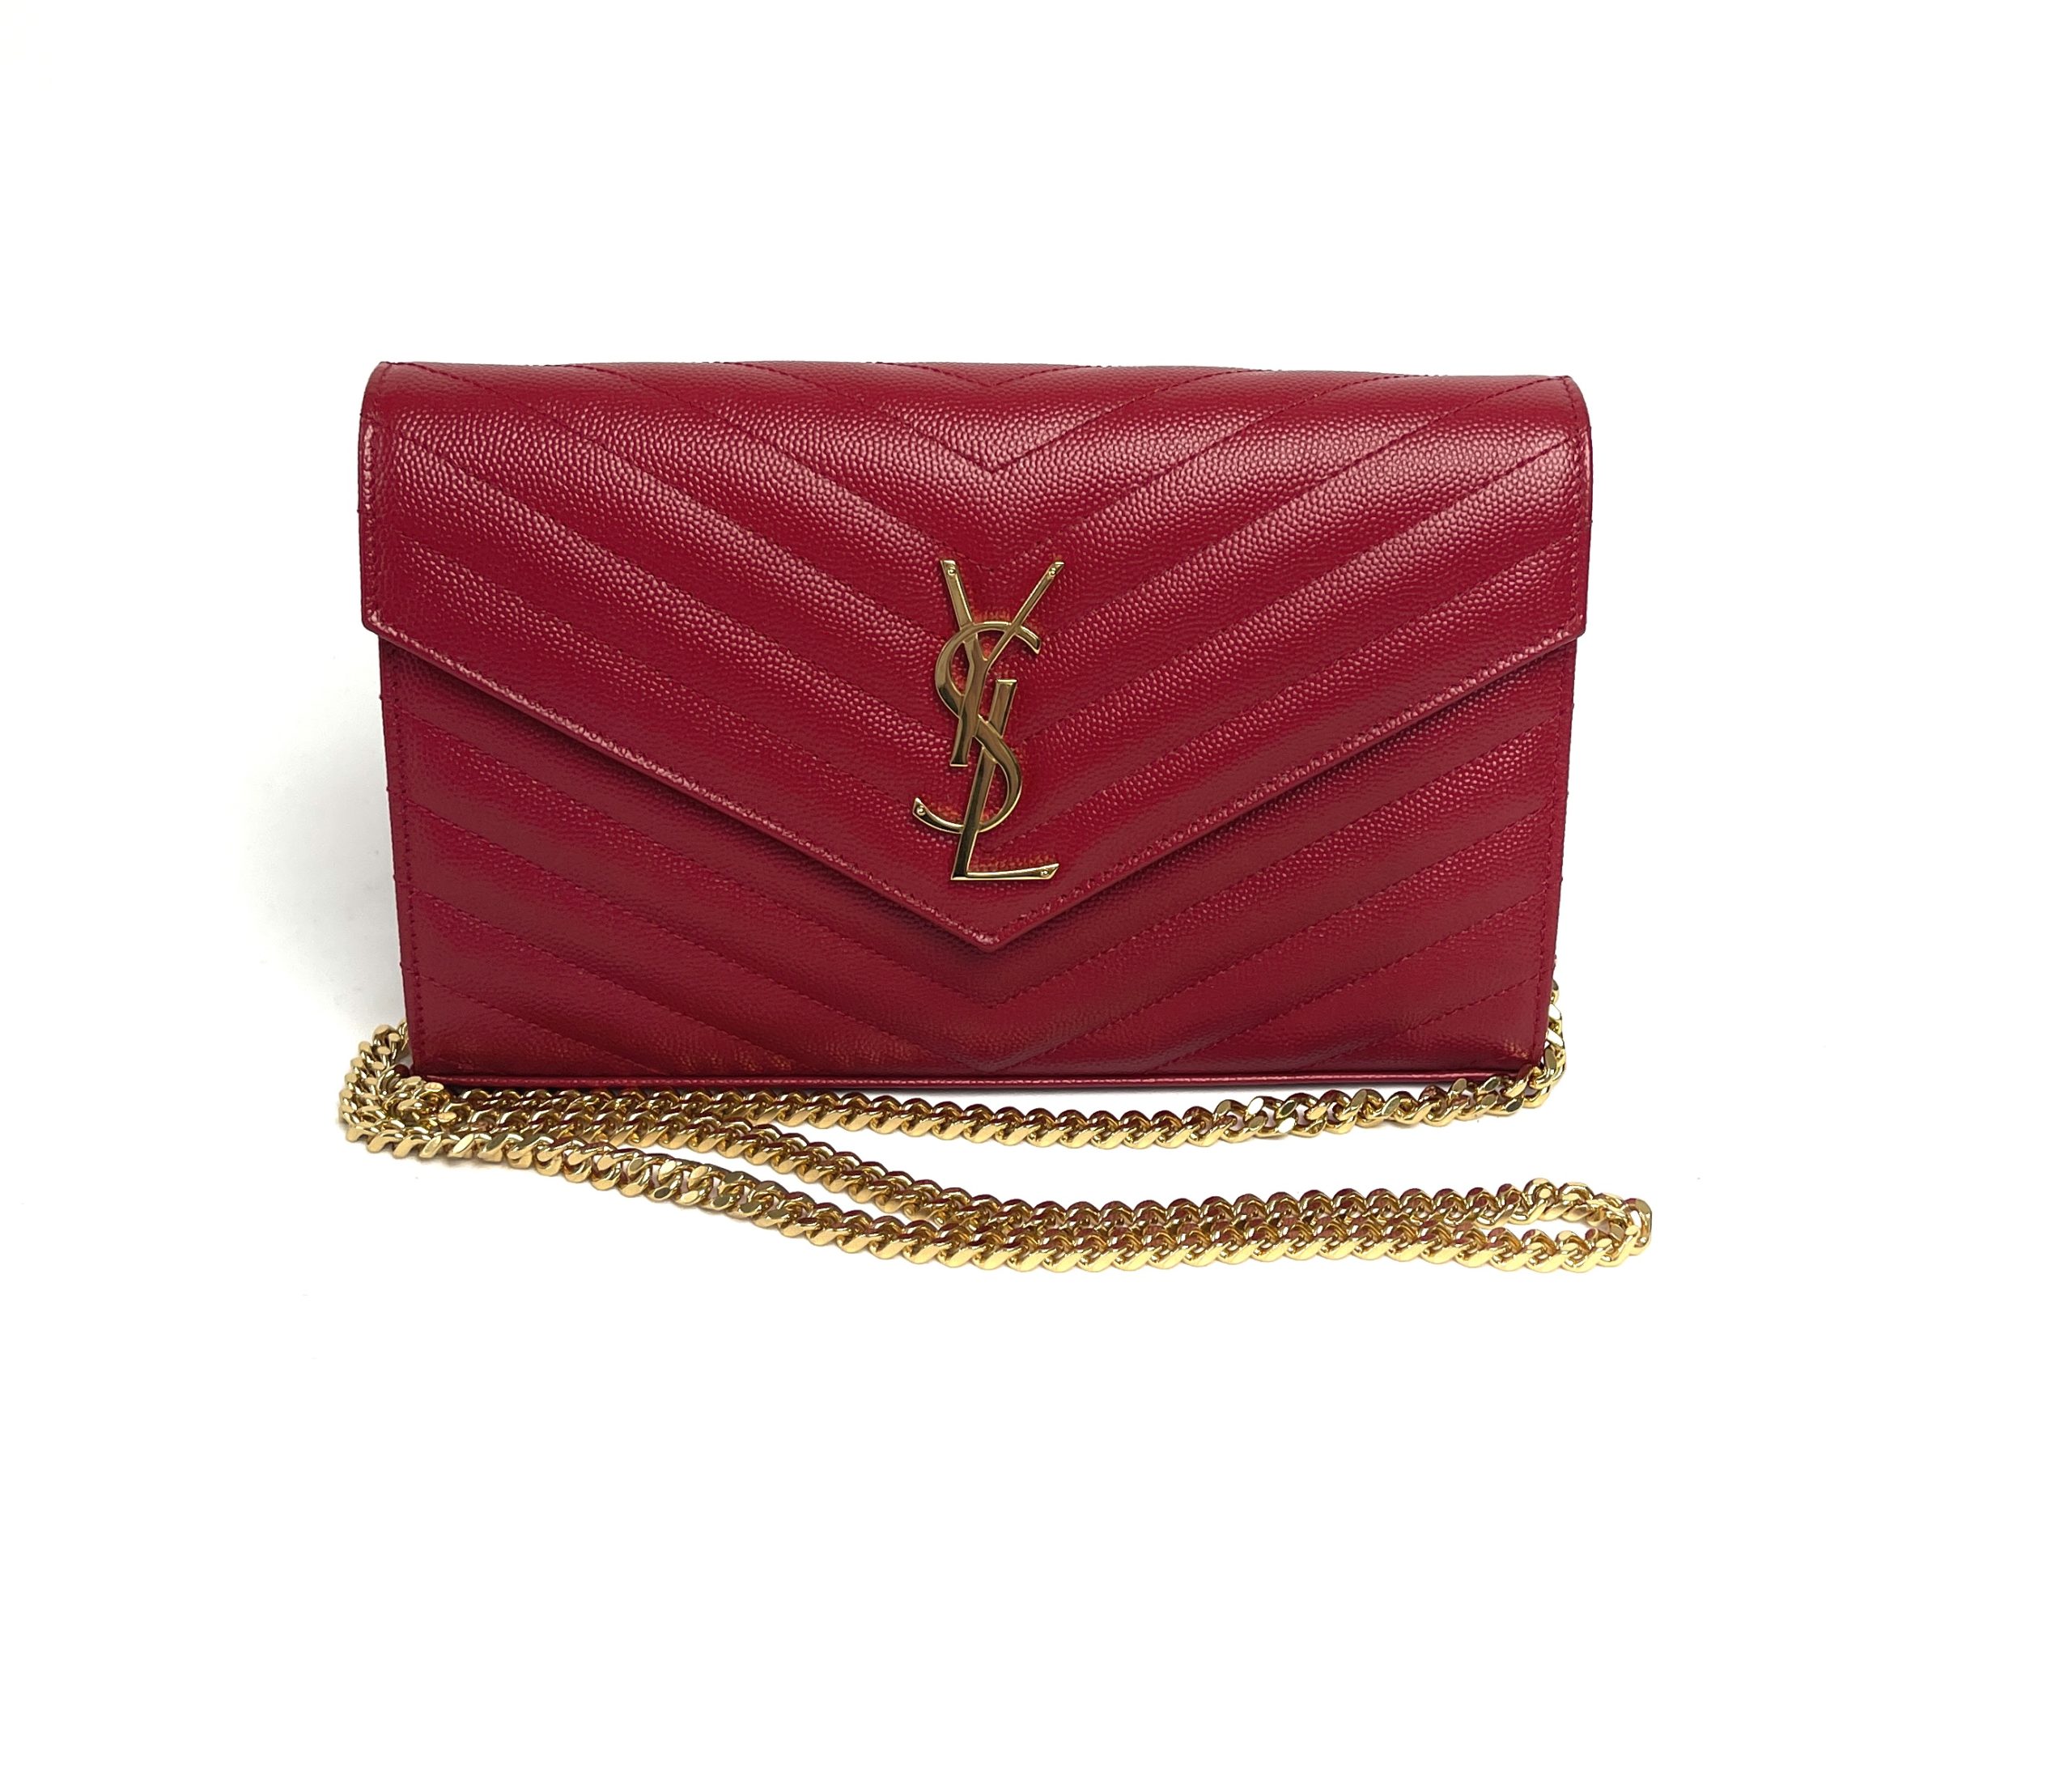 YSL Envelope Chain Wallet in Grain De Poudre Embossed Leather,Red,retail  $1350